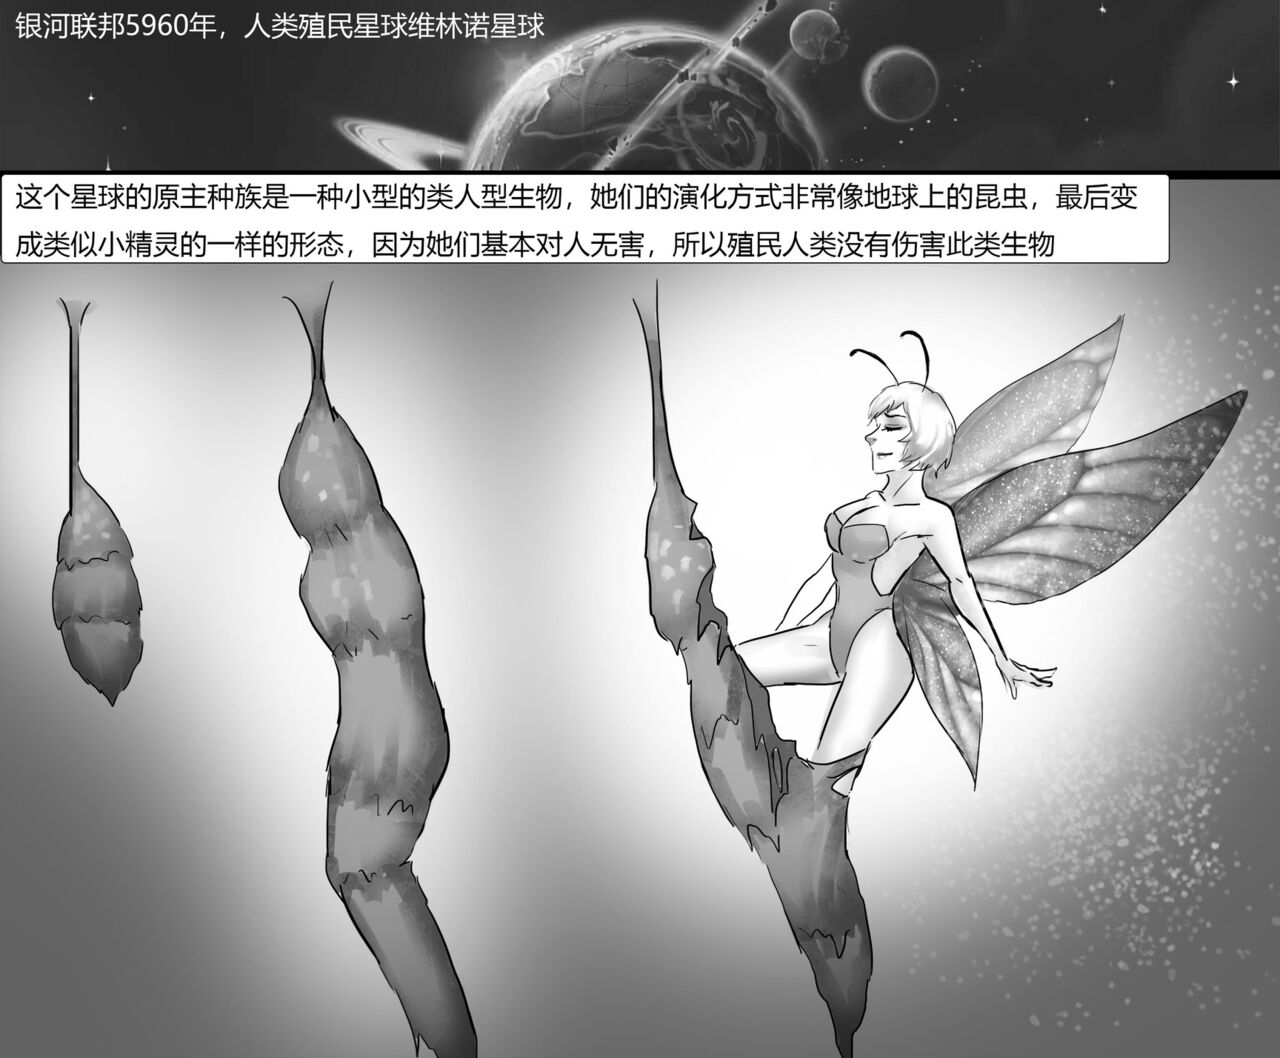 [King] 《茧中精灵》《The elf in the cocoon》 Chinese 